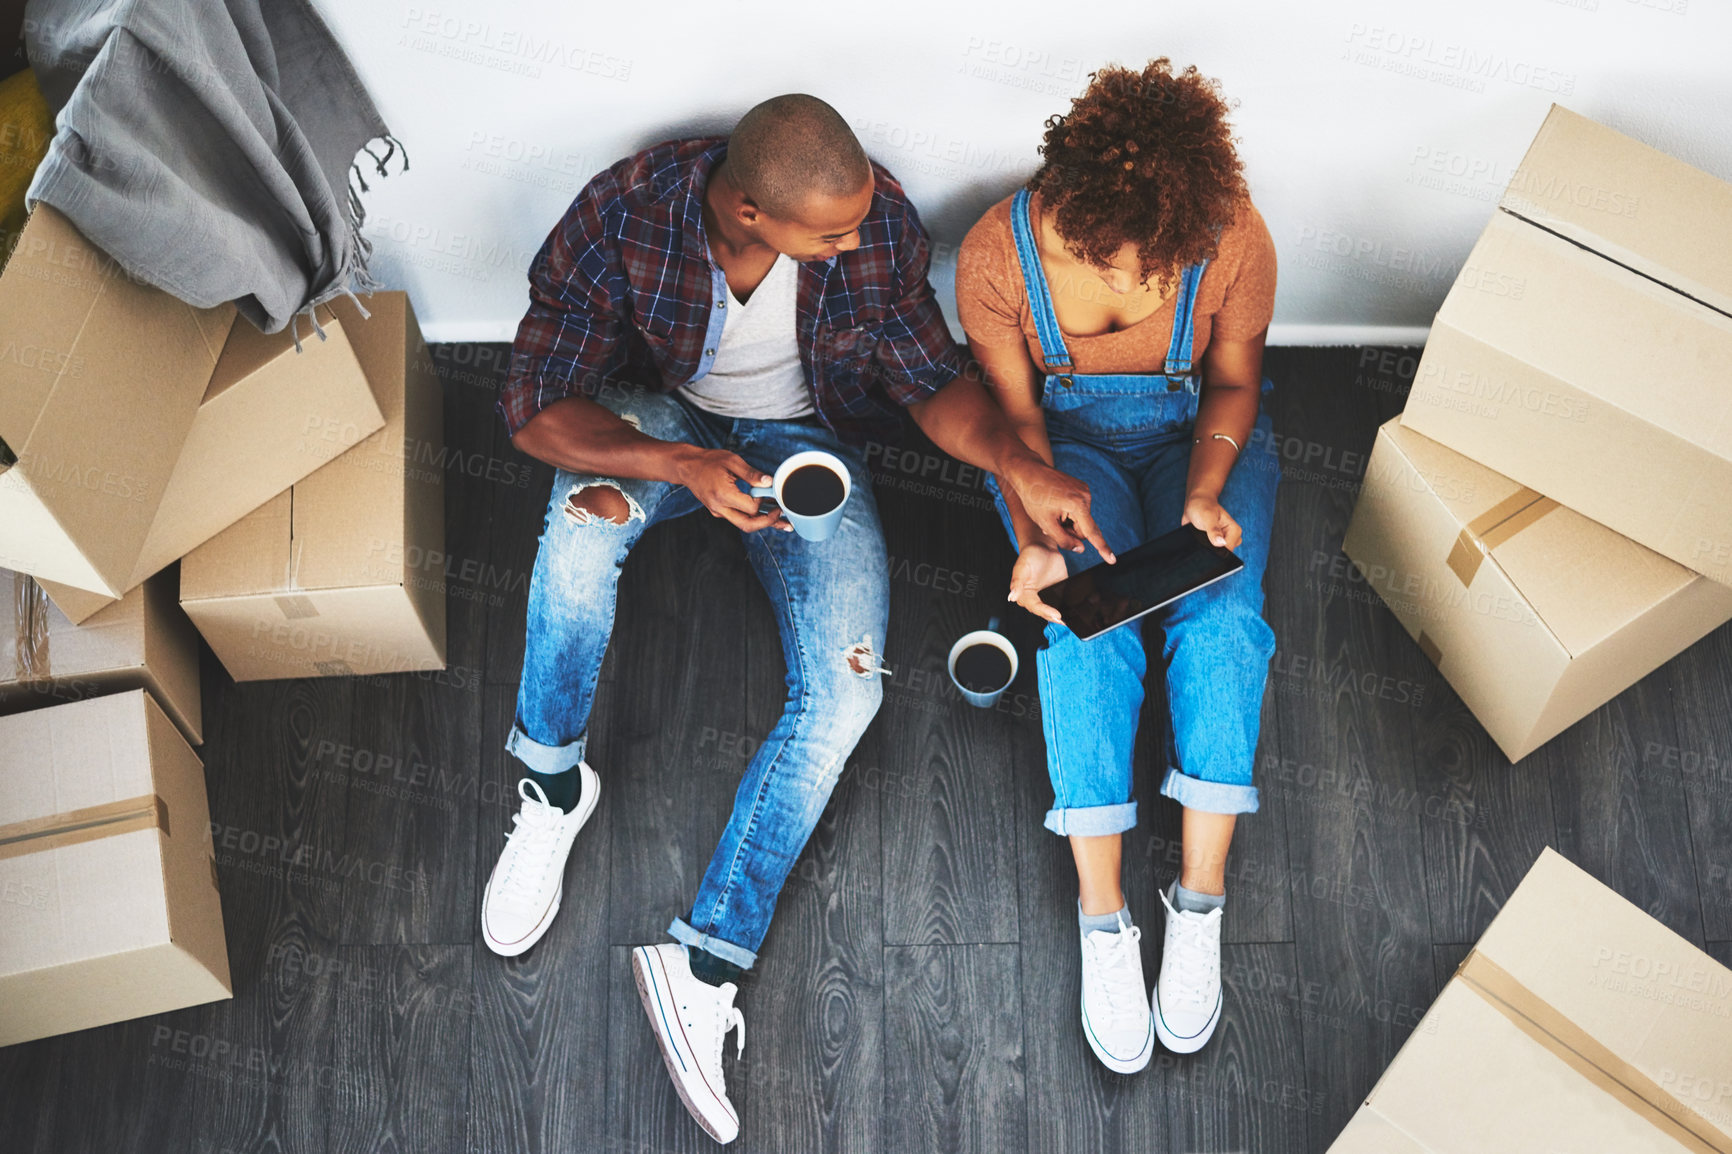 Buy stock photo Digital tablet, coffee and couple with boxes planning their new apartment together on the floor. Technology, caffeine and top view of man and woman doing property research on mobile moving in a home.